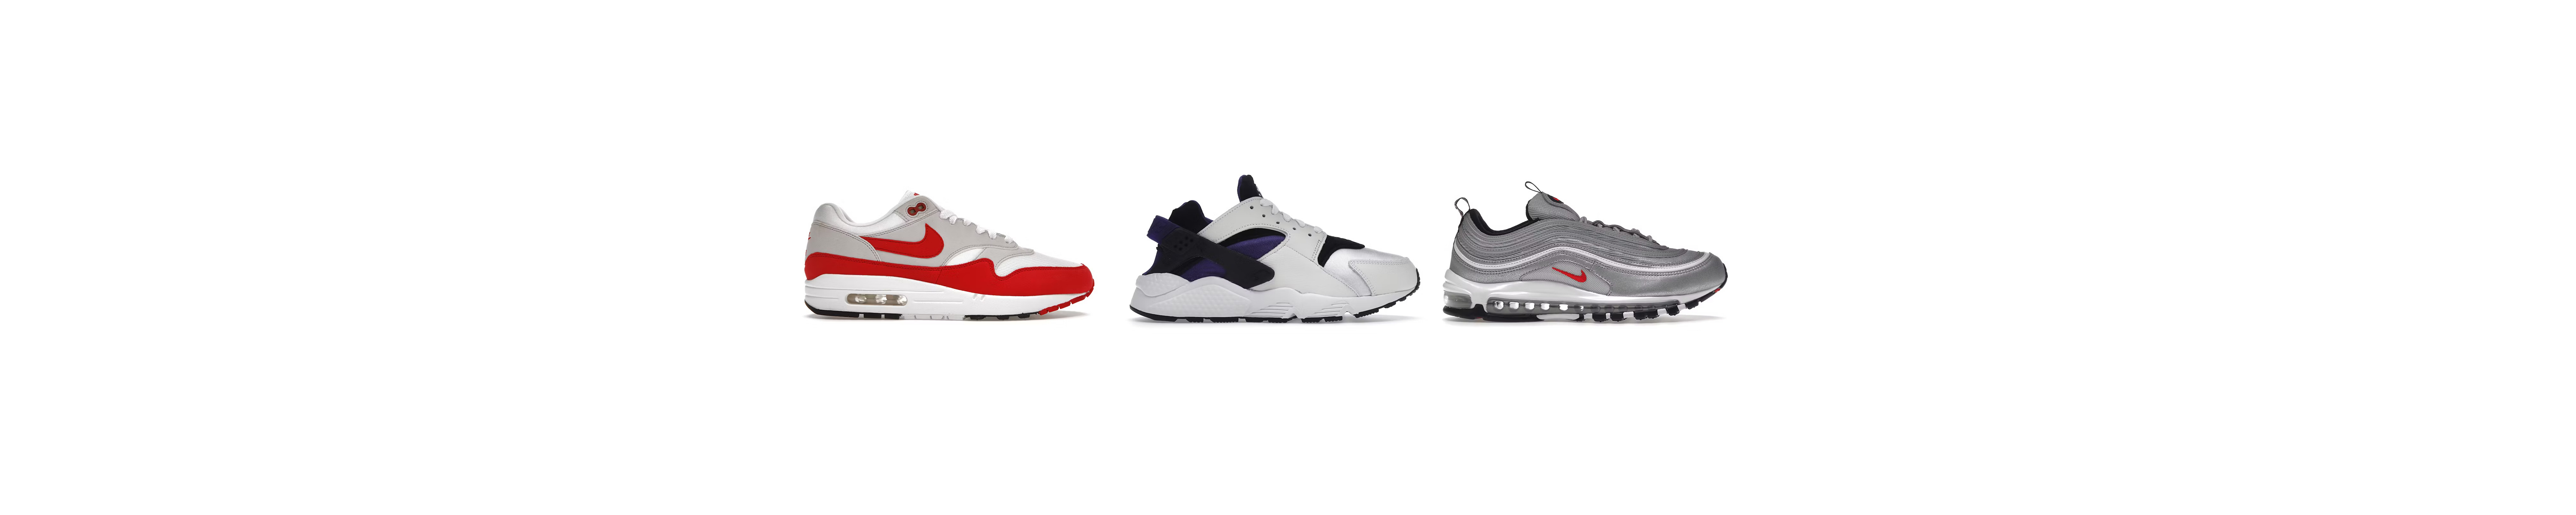 The 10 Best Nike Silhouettes of All Time